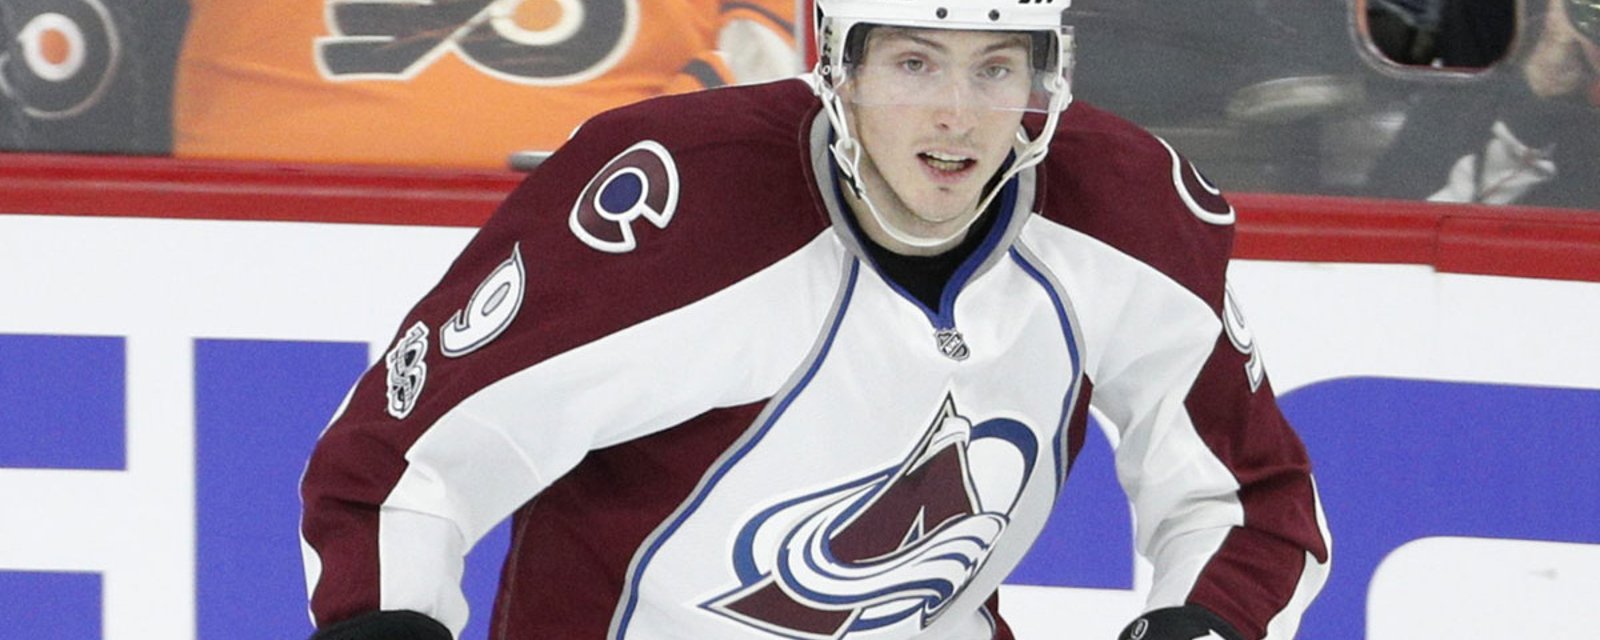 Rumor: As many as 8 teams now in the mix for Duchene!